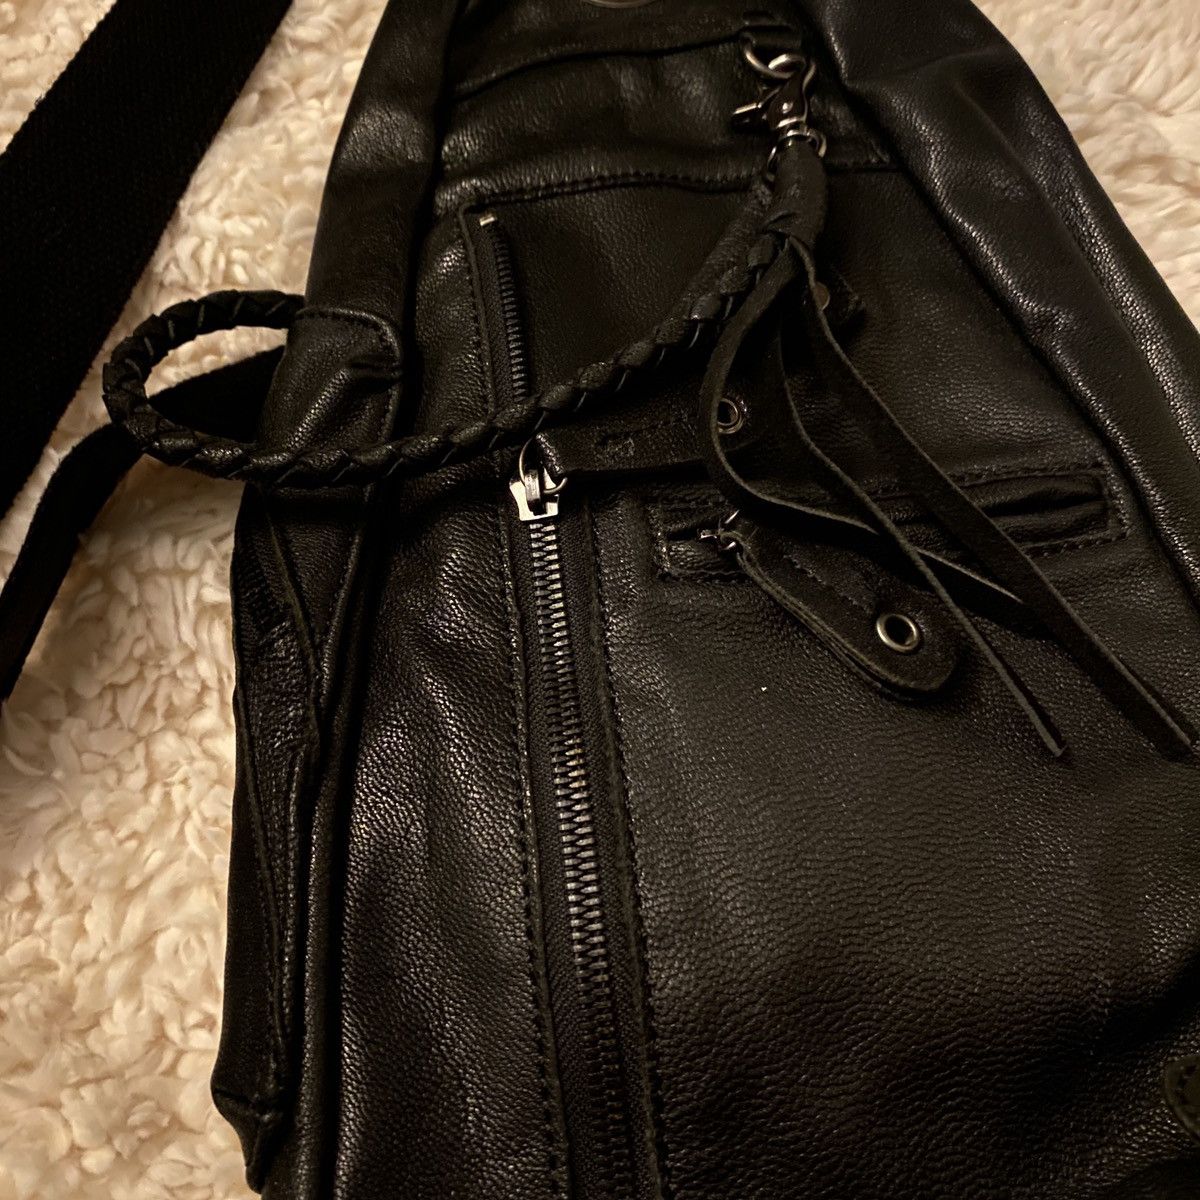 Semantic Design VERY RARE JAPANESE semantic design crossbody leather bag Size ONE SIZE - 6 Preview